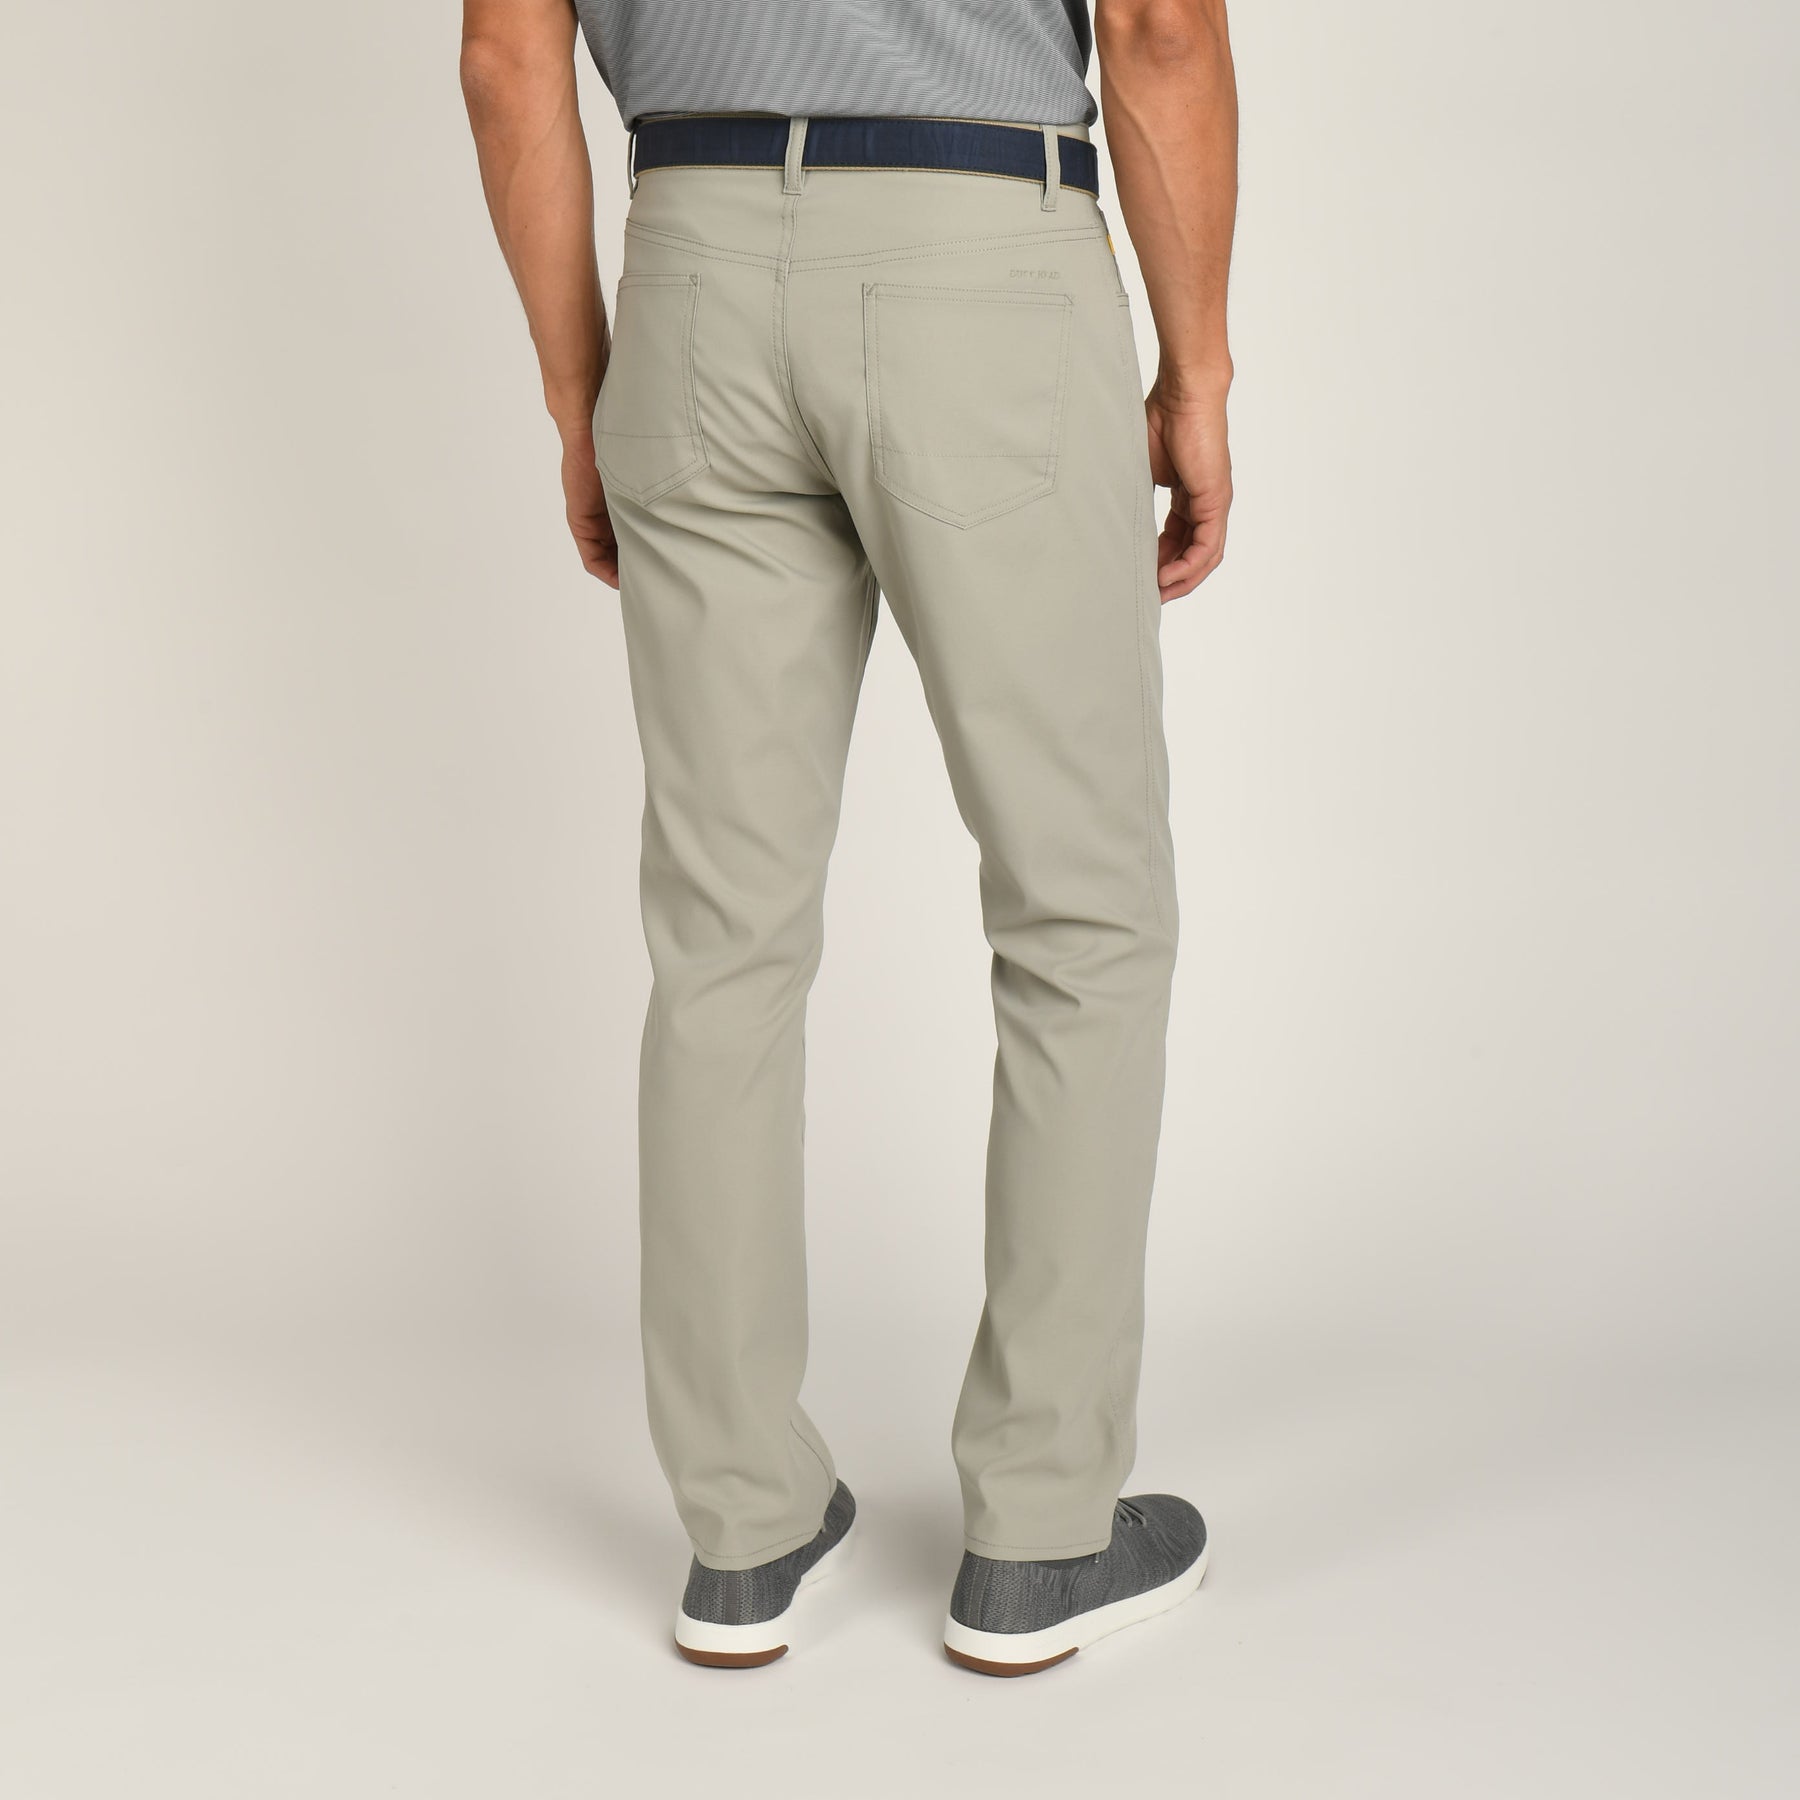 FP One 5 Pocket Slouch Pant